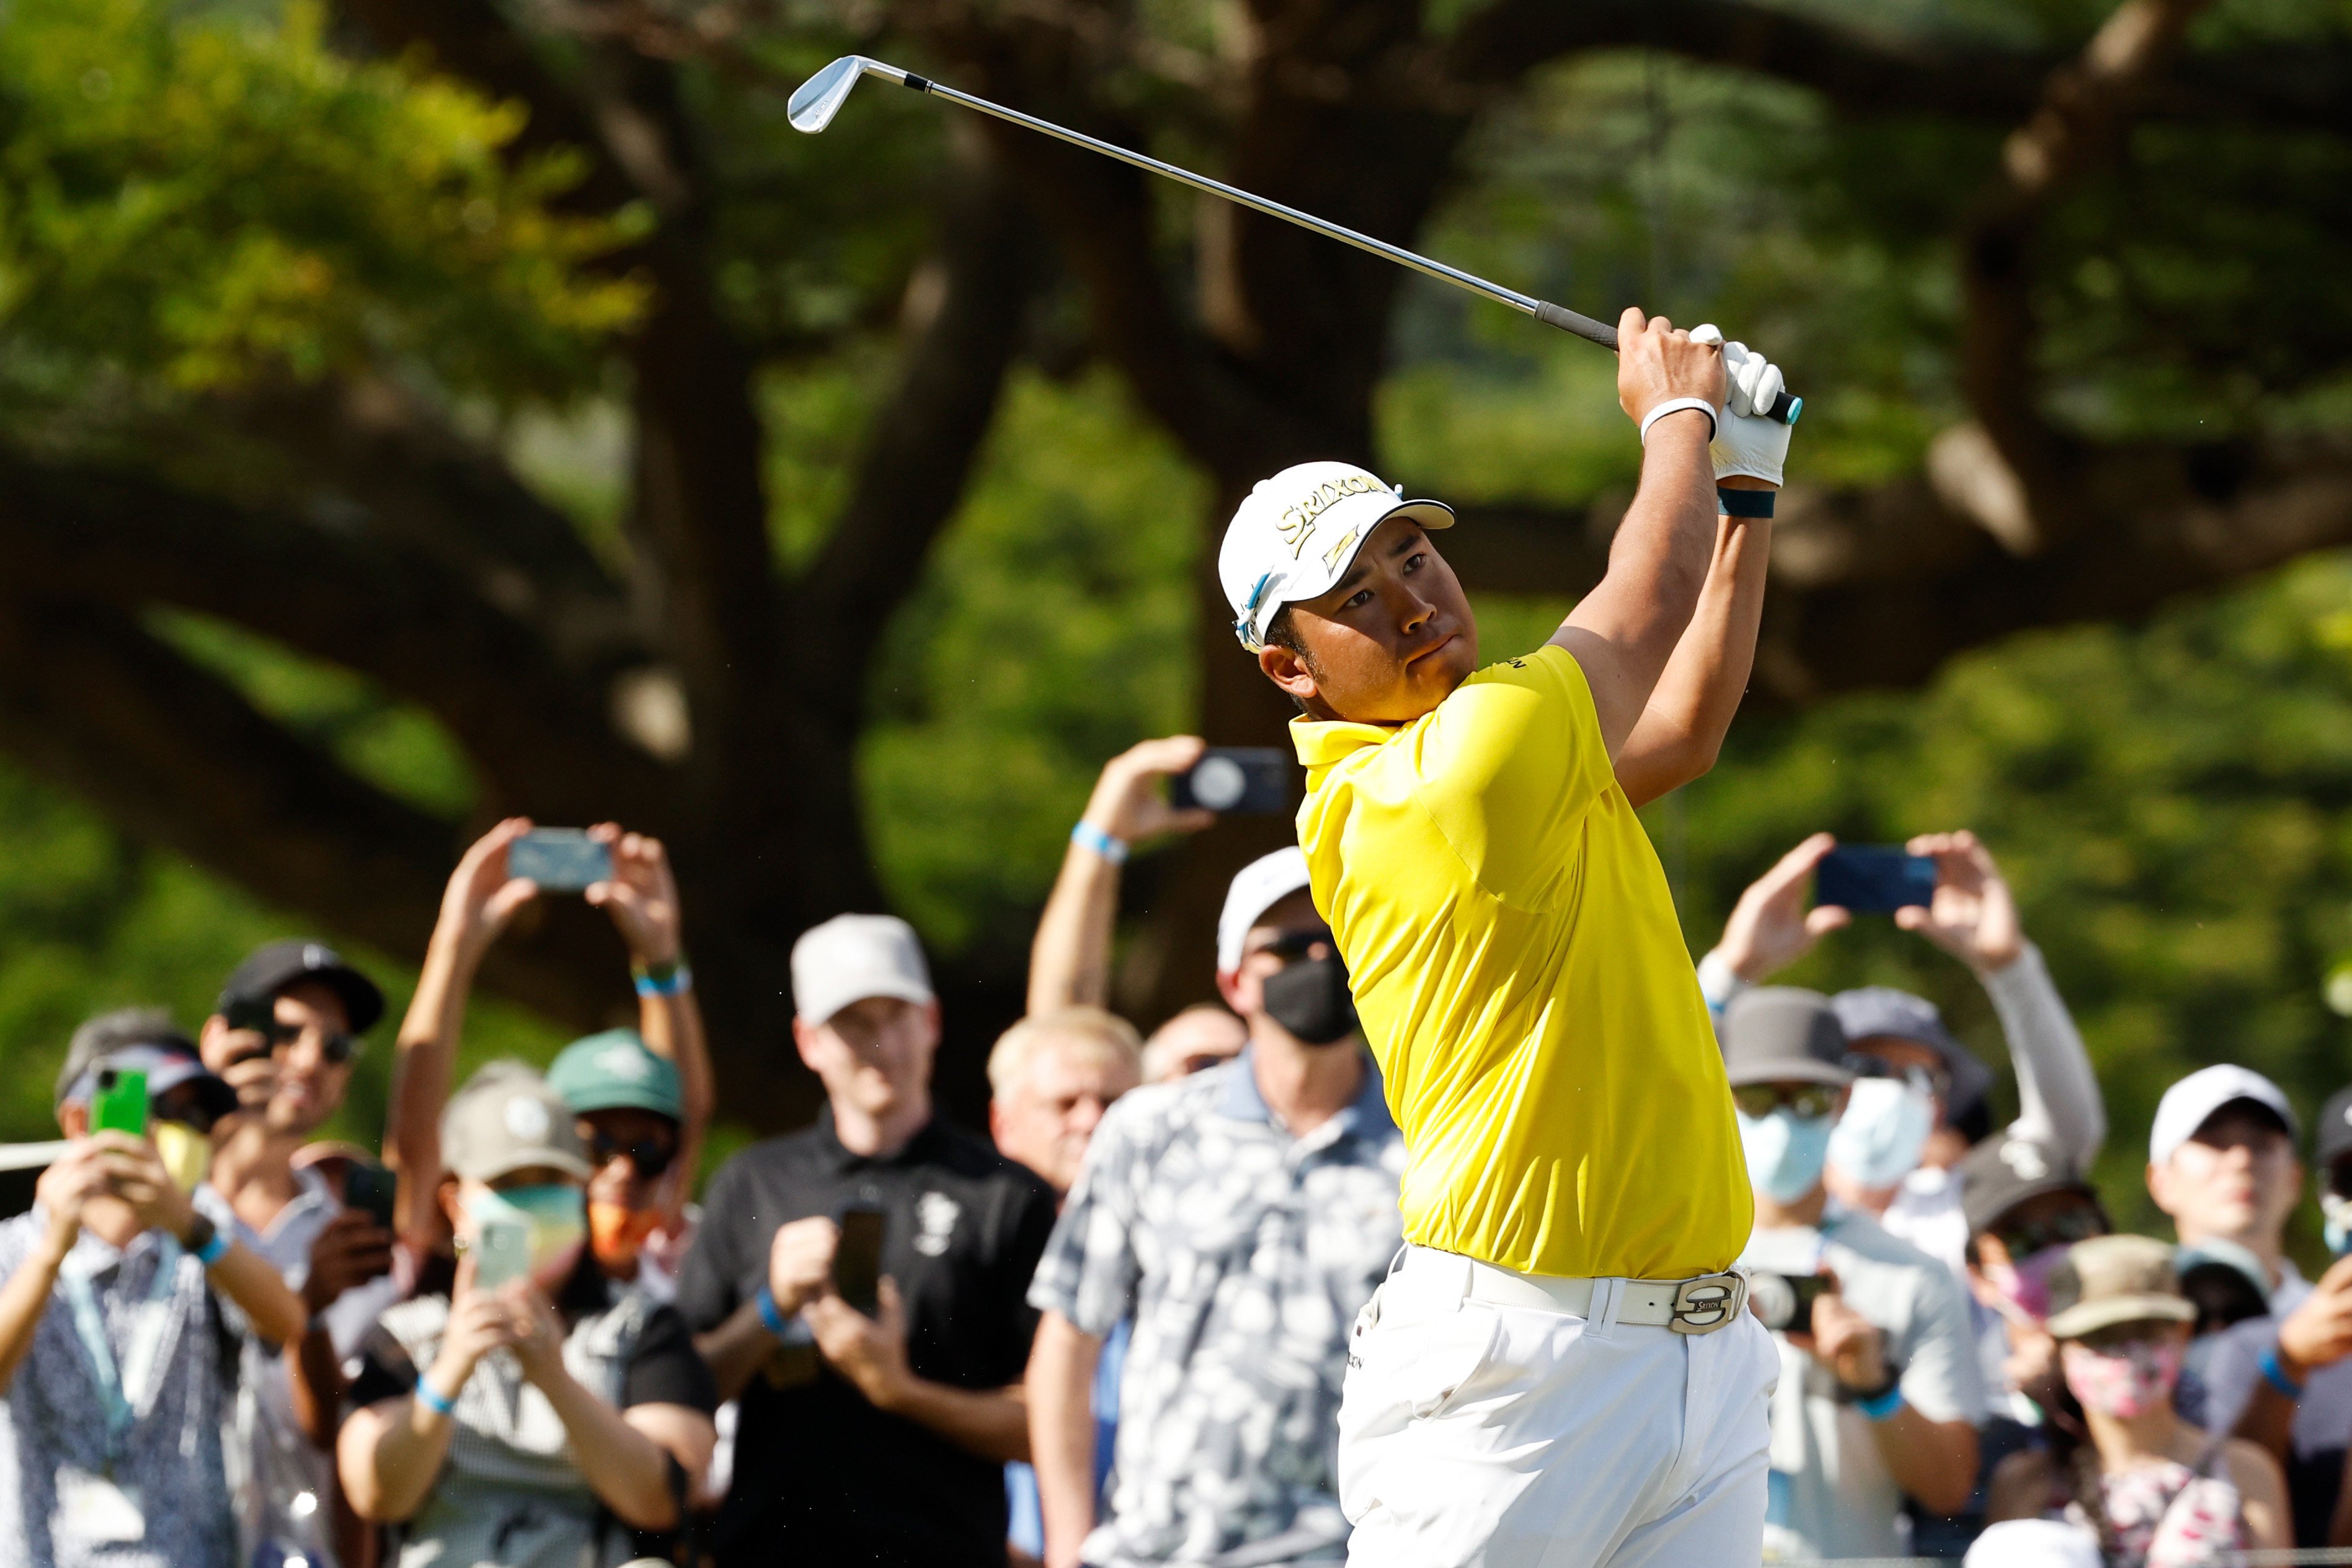 Hideki Matsuyama came from behind to win the Sony Open in dramatic fashion. Photo: Getty Images